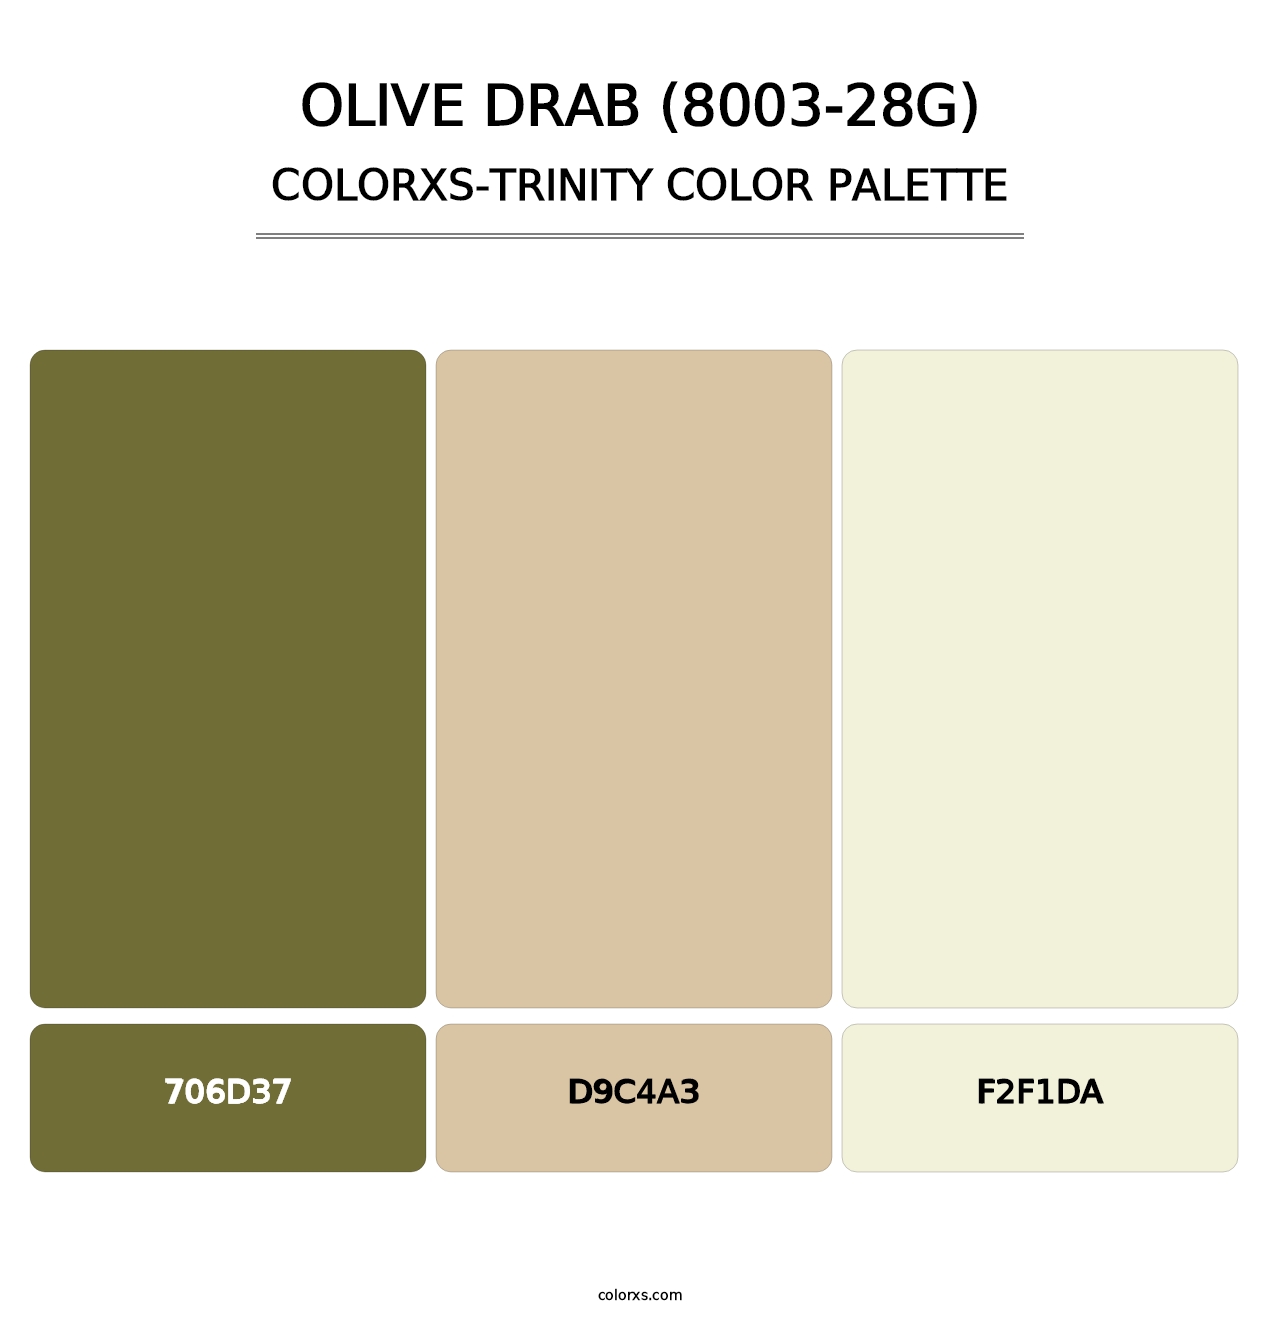 Olive Drab (8003-28G) - Colorxs Trinity Palette